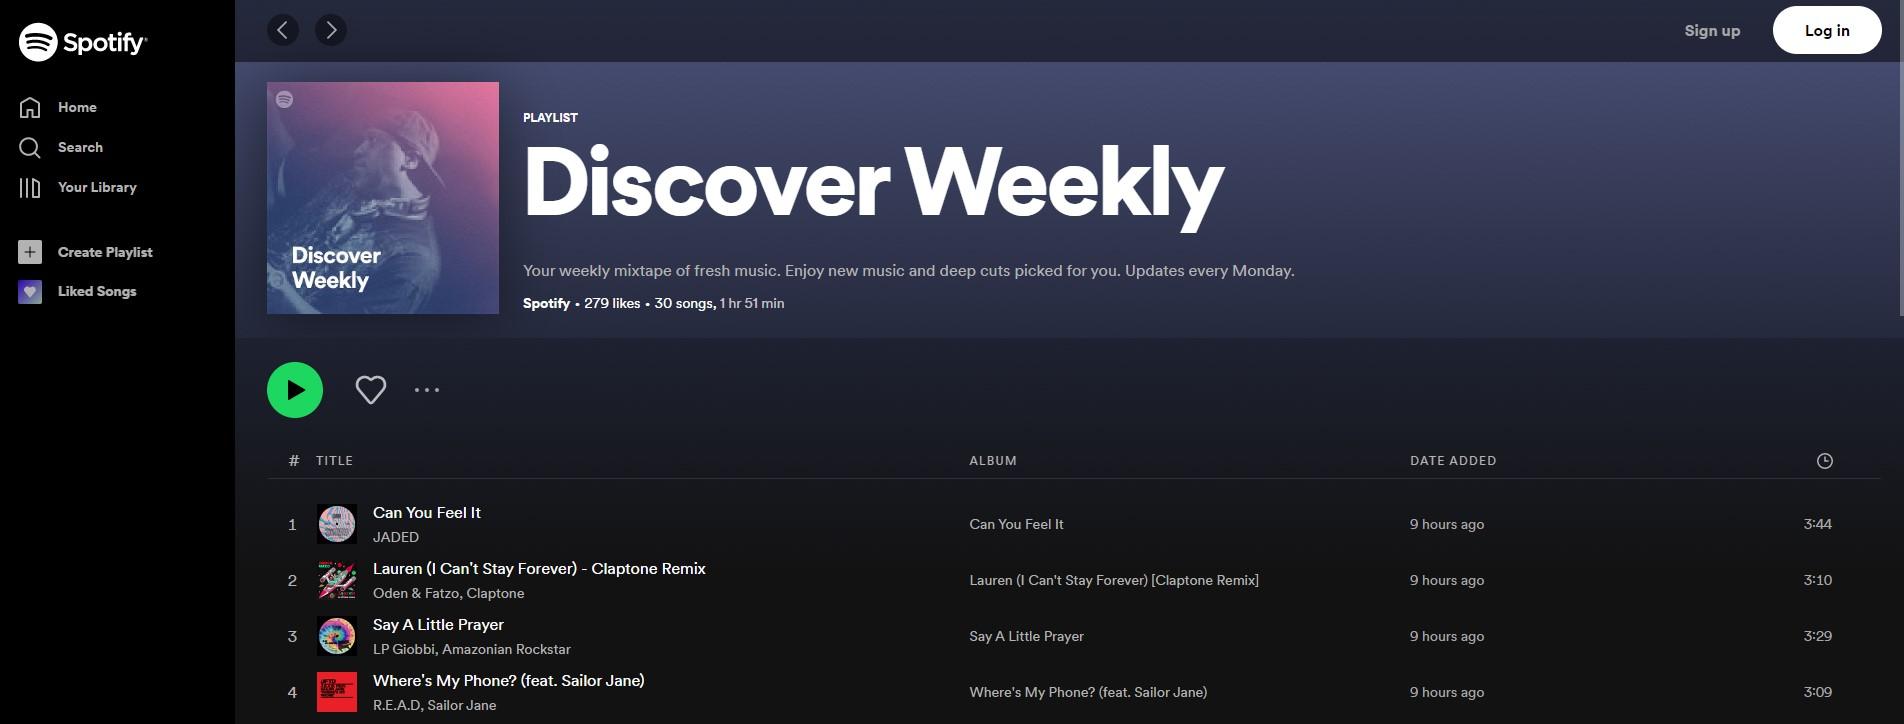 Spotify Discover Weekly Data Pipeline Example